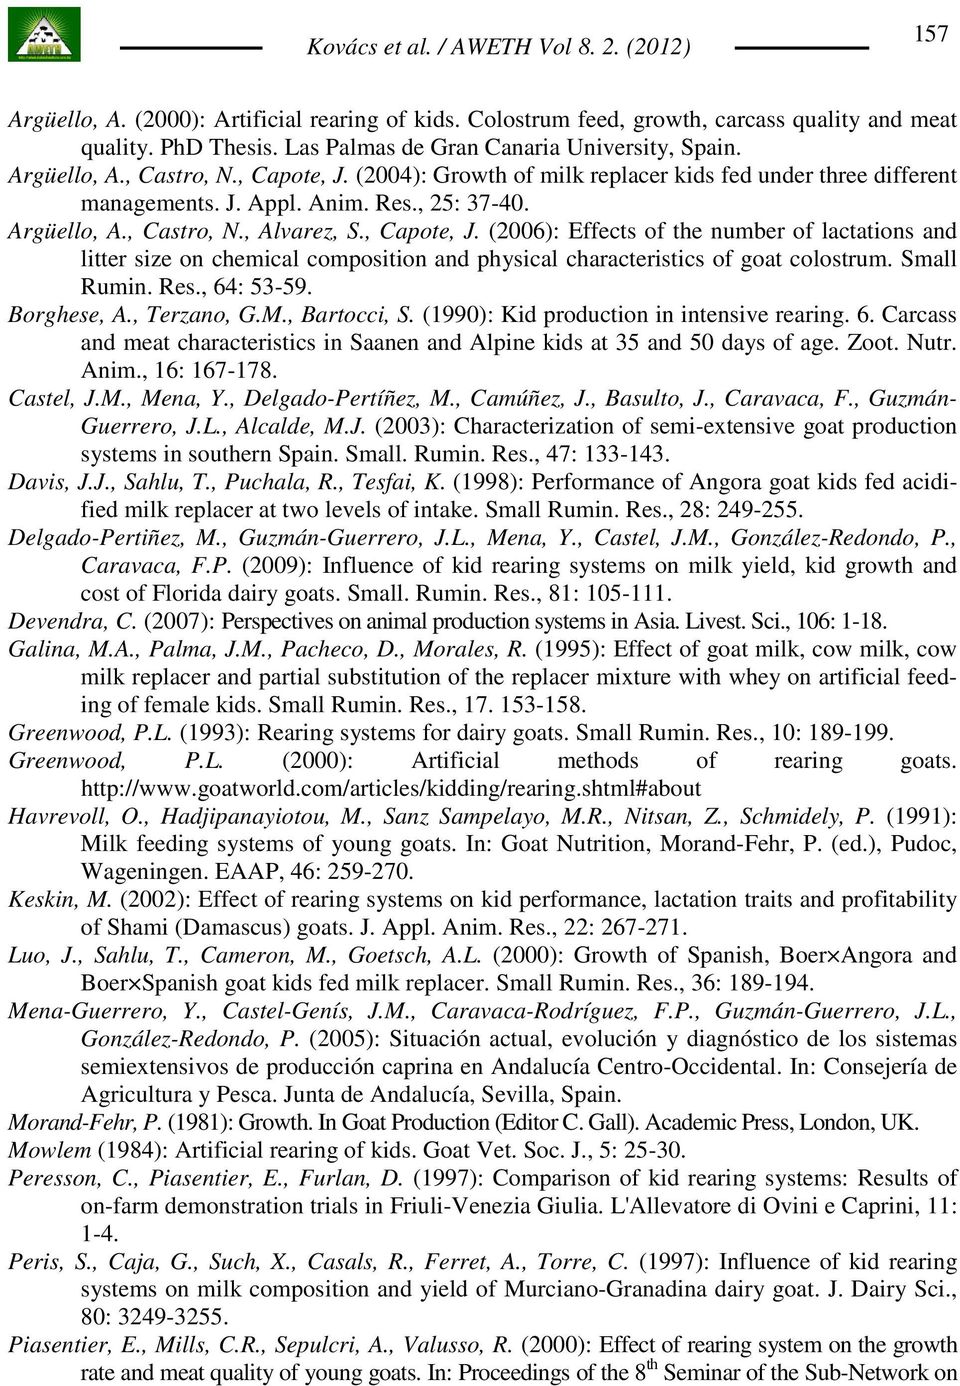 Small Rumin. Res., 64: 53-59. Borghese, A., Terzano, G.M., Bartocci, S. (1990): Kid production in intensive rearing. 6. Carcass and meat characteristics in Saanen and Alpine kids at 35 and 50 days of age.